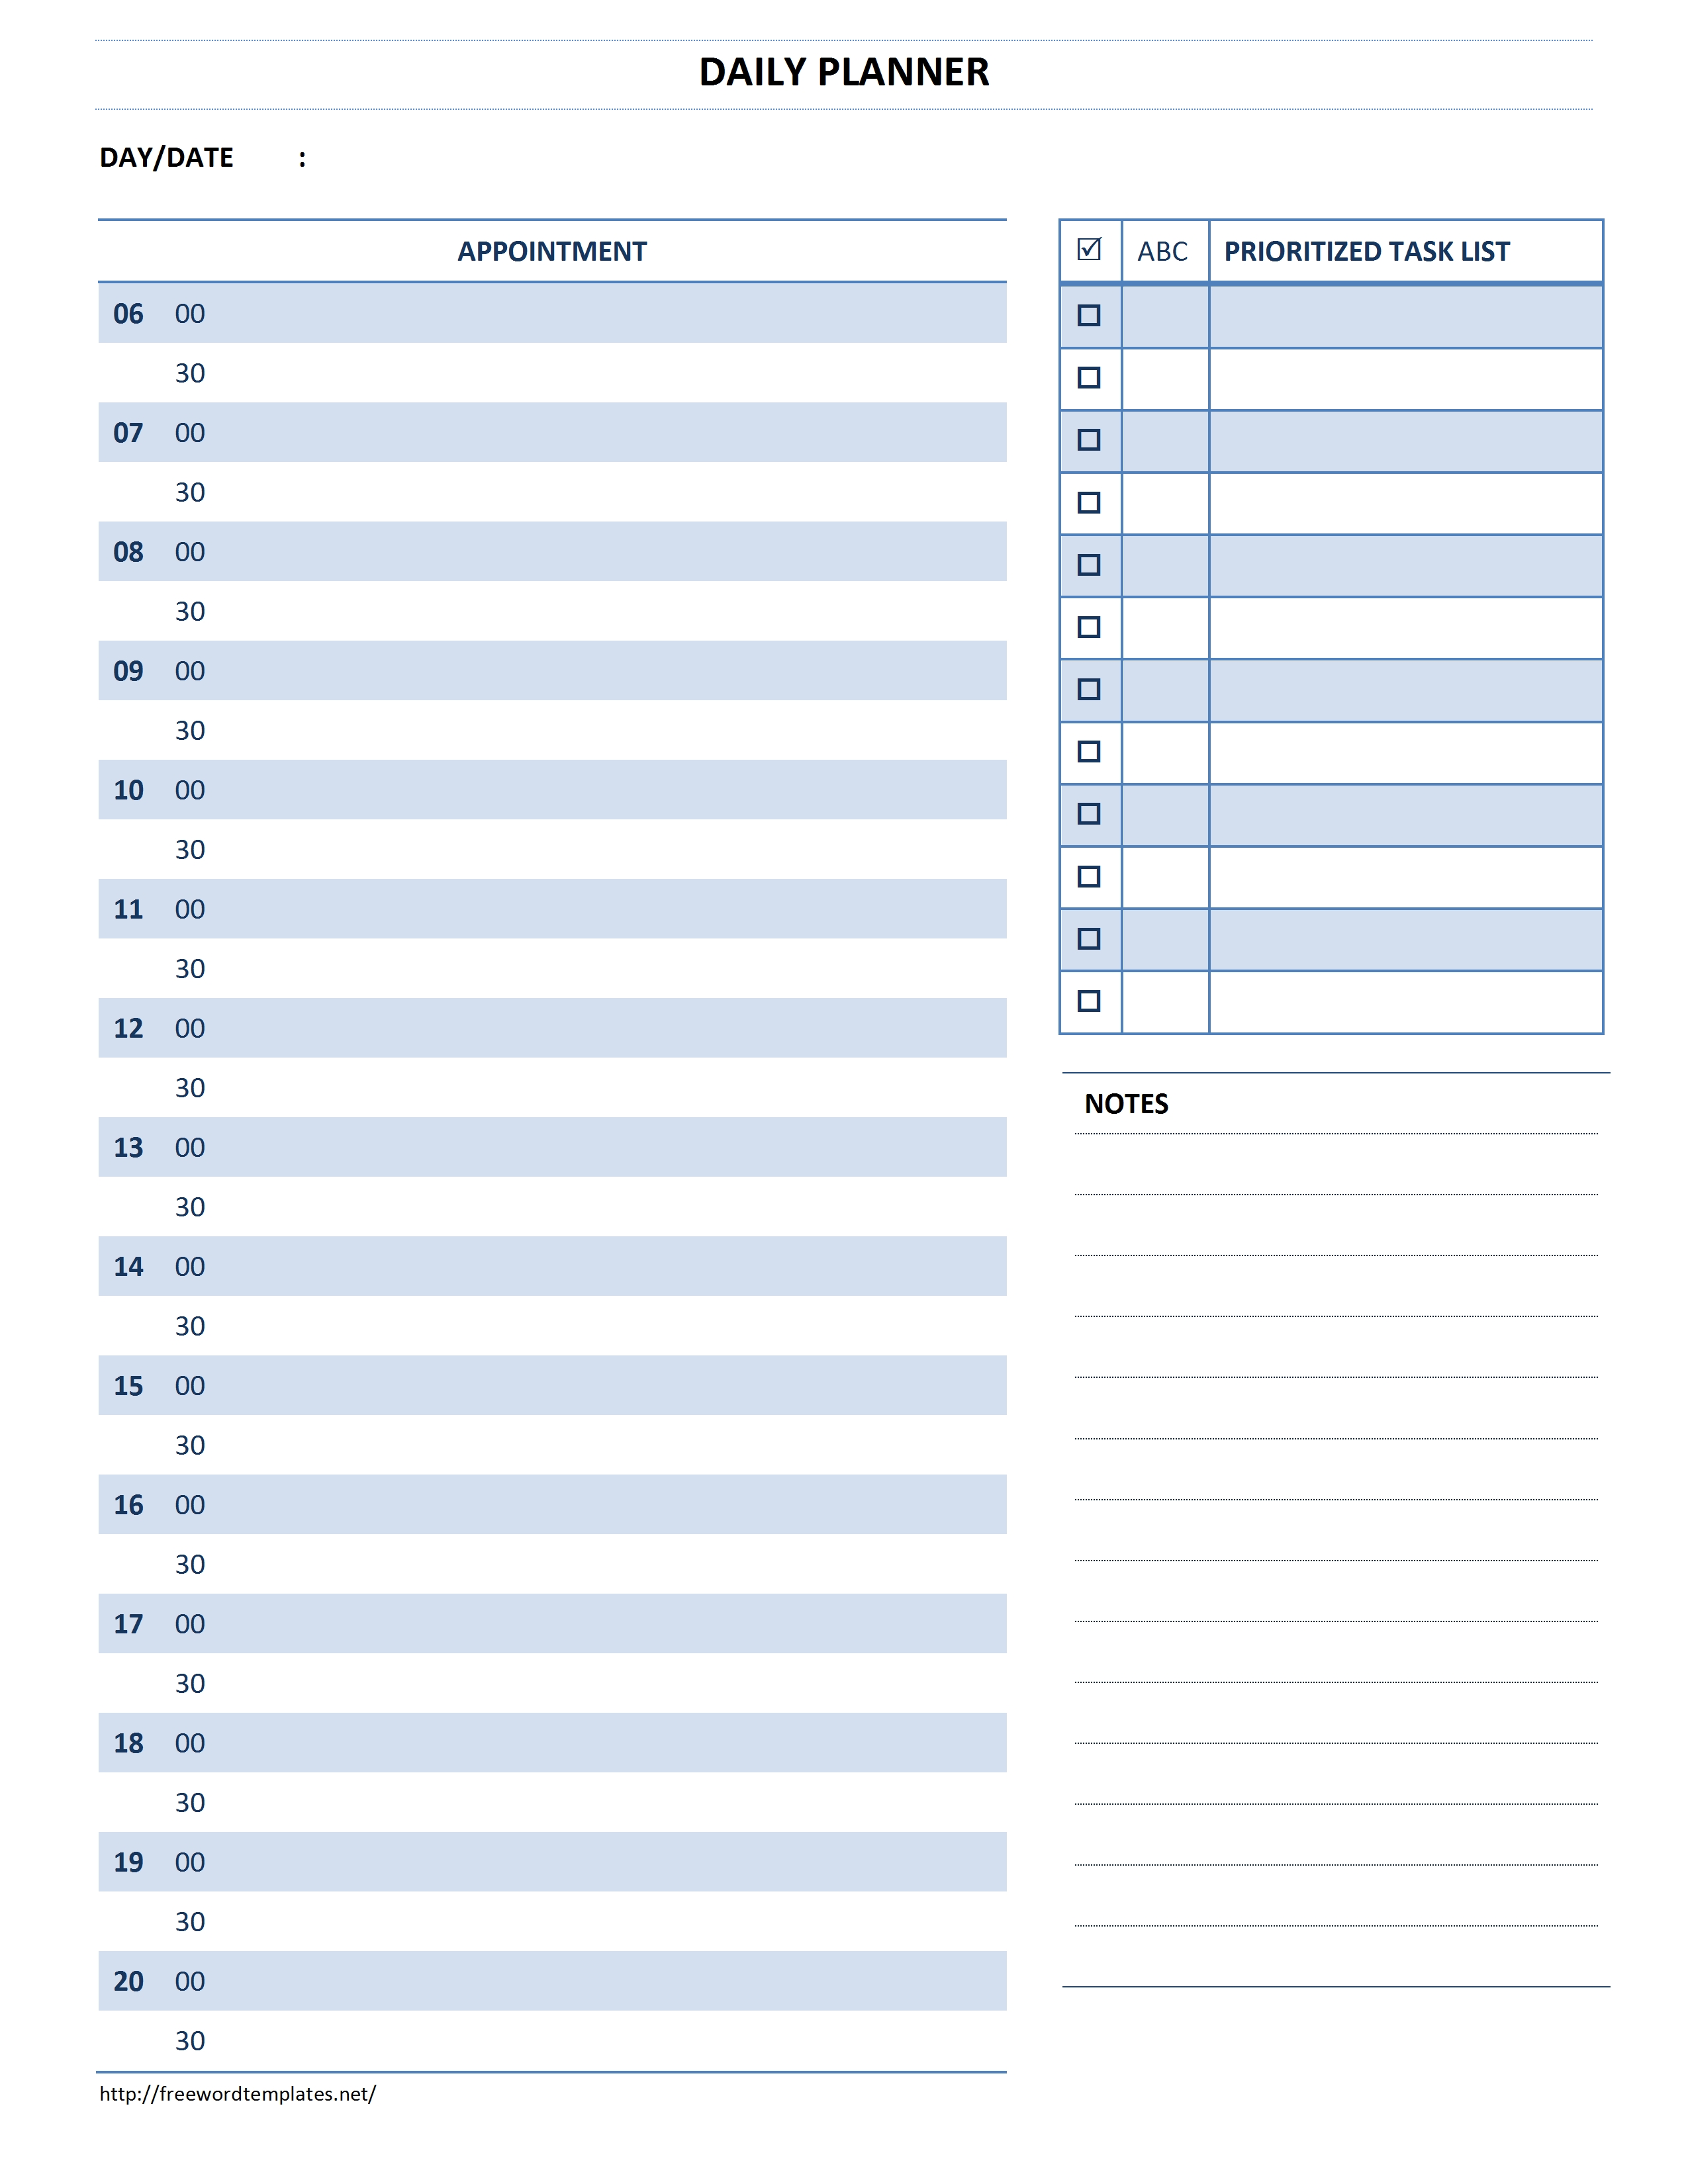 Daily Planner Template Free | Free Business Template